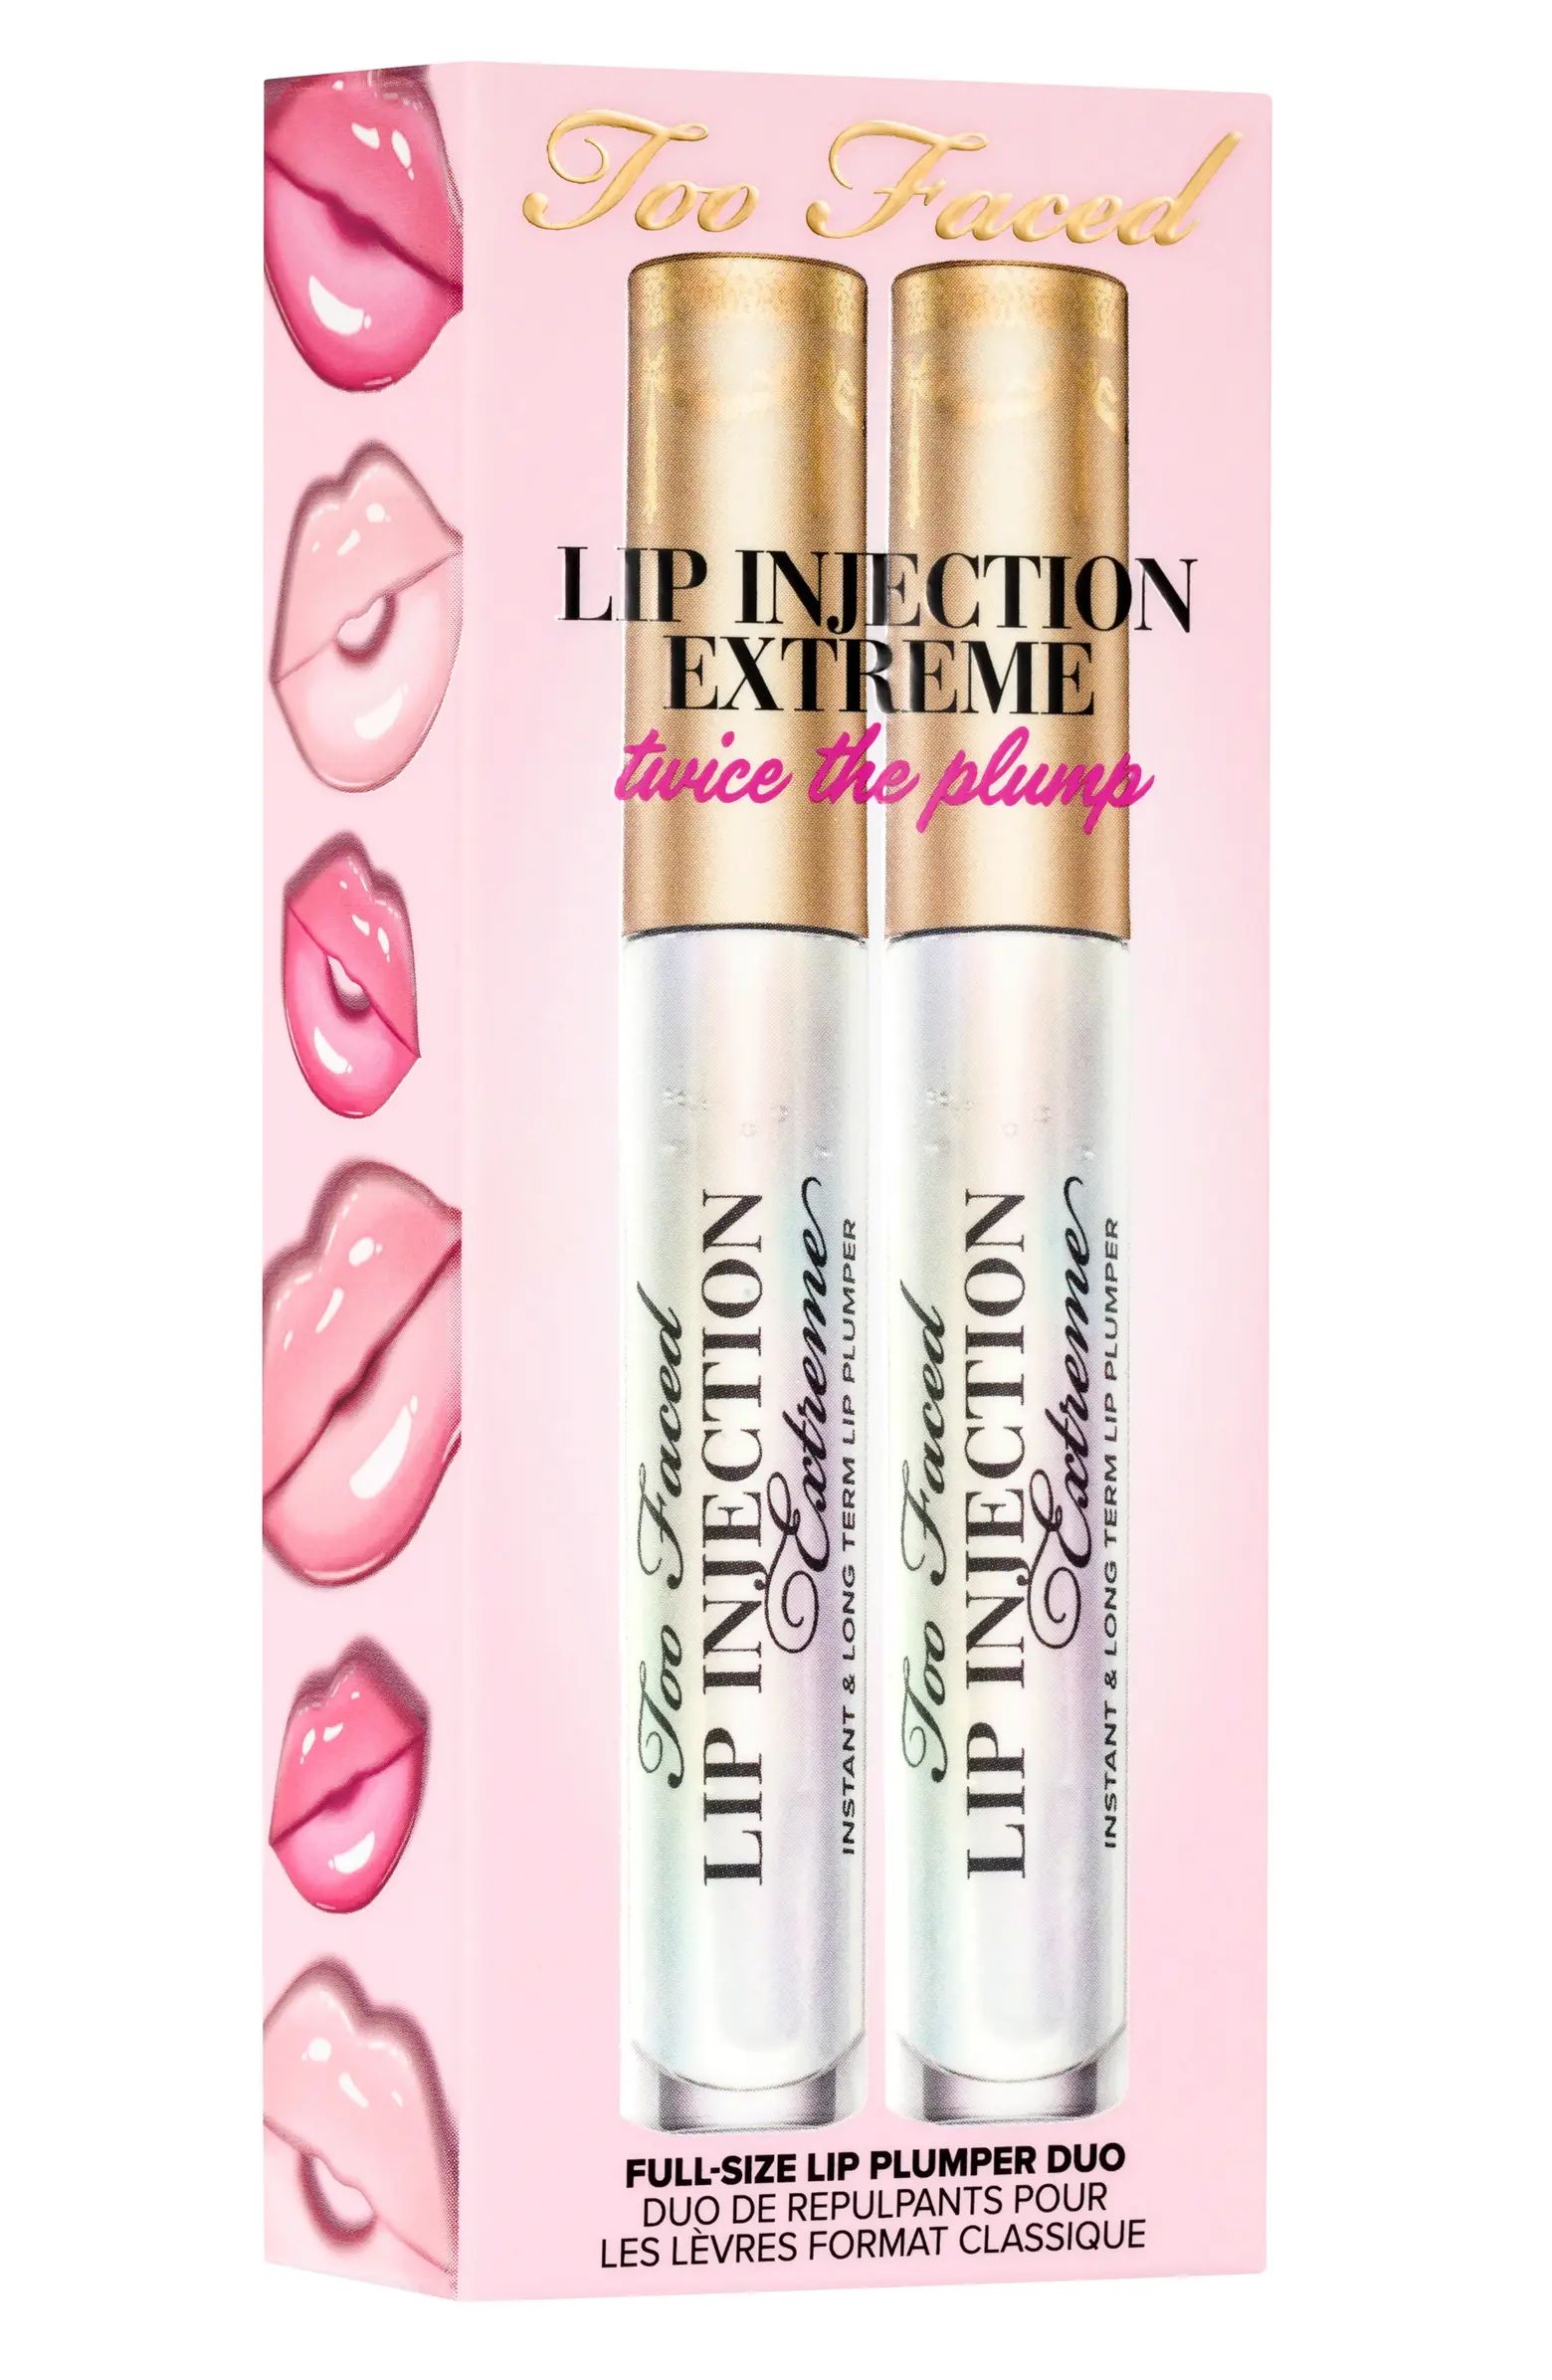 Lip Injection Extreme Twice the Pump Duo Set $58 Value | Nordstrom